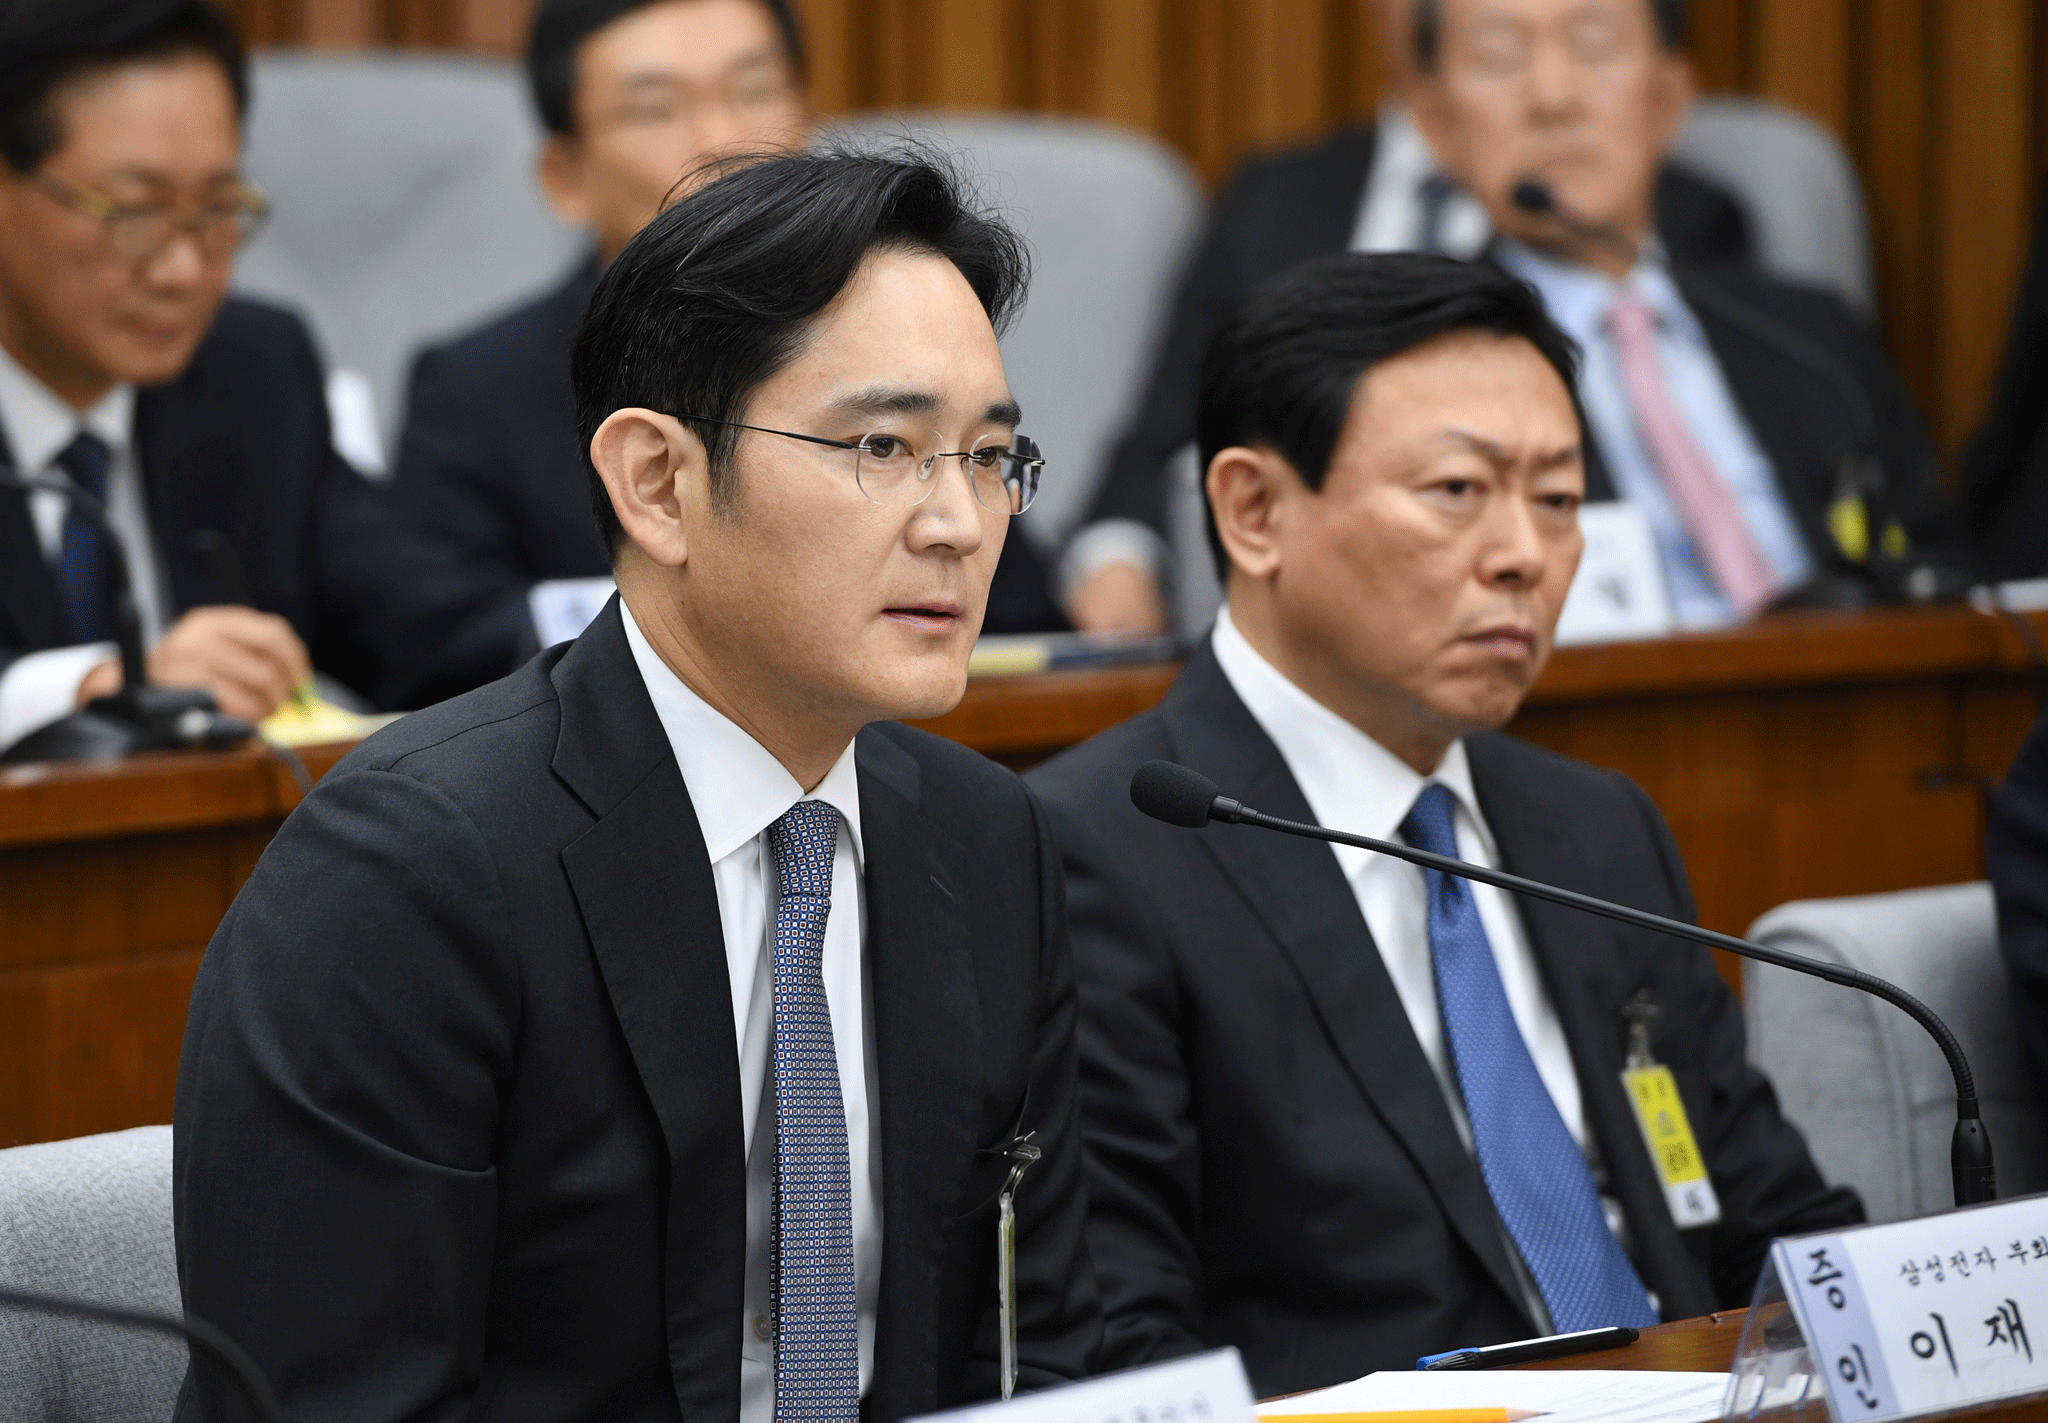 Samsung's Lee Refuses to Testify at Ex-Korean President's Trial